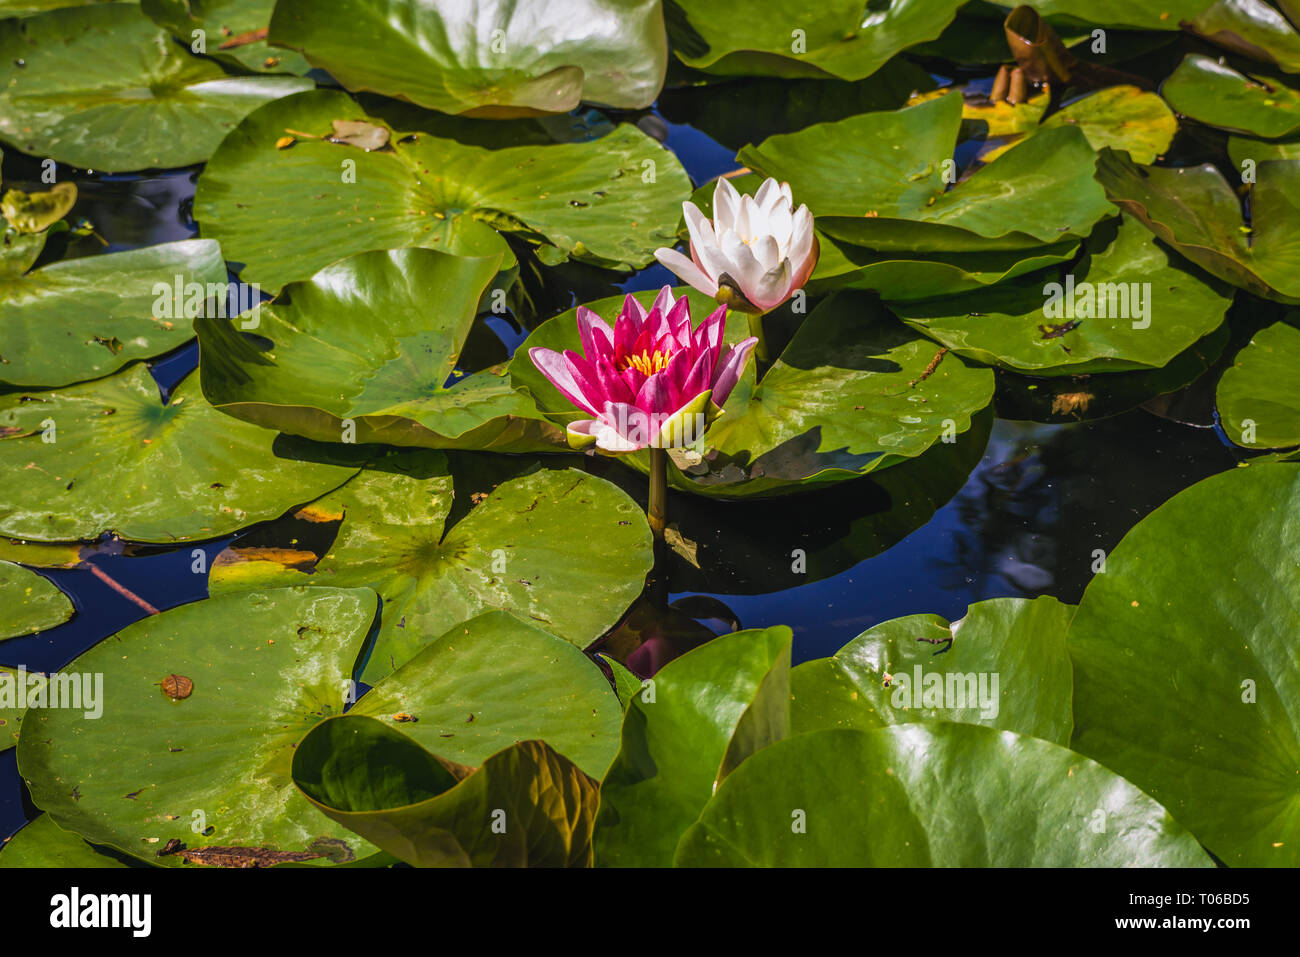 Nymphaea flowers in the pond Stock Photo